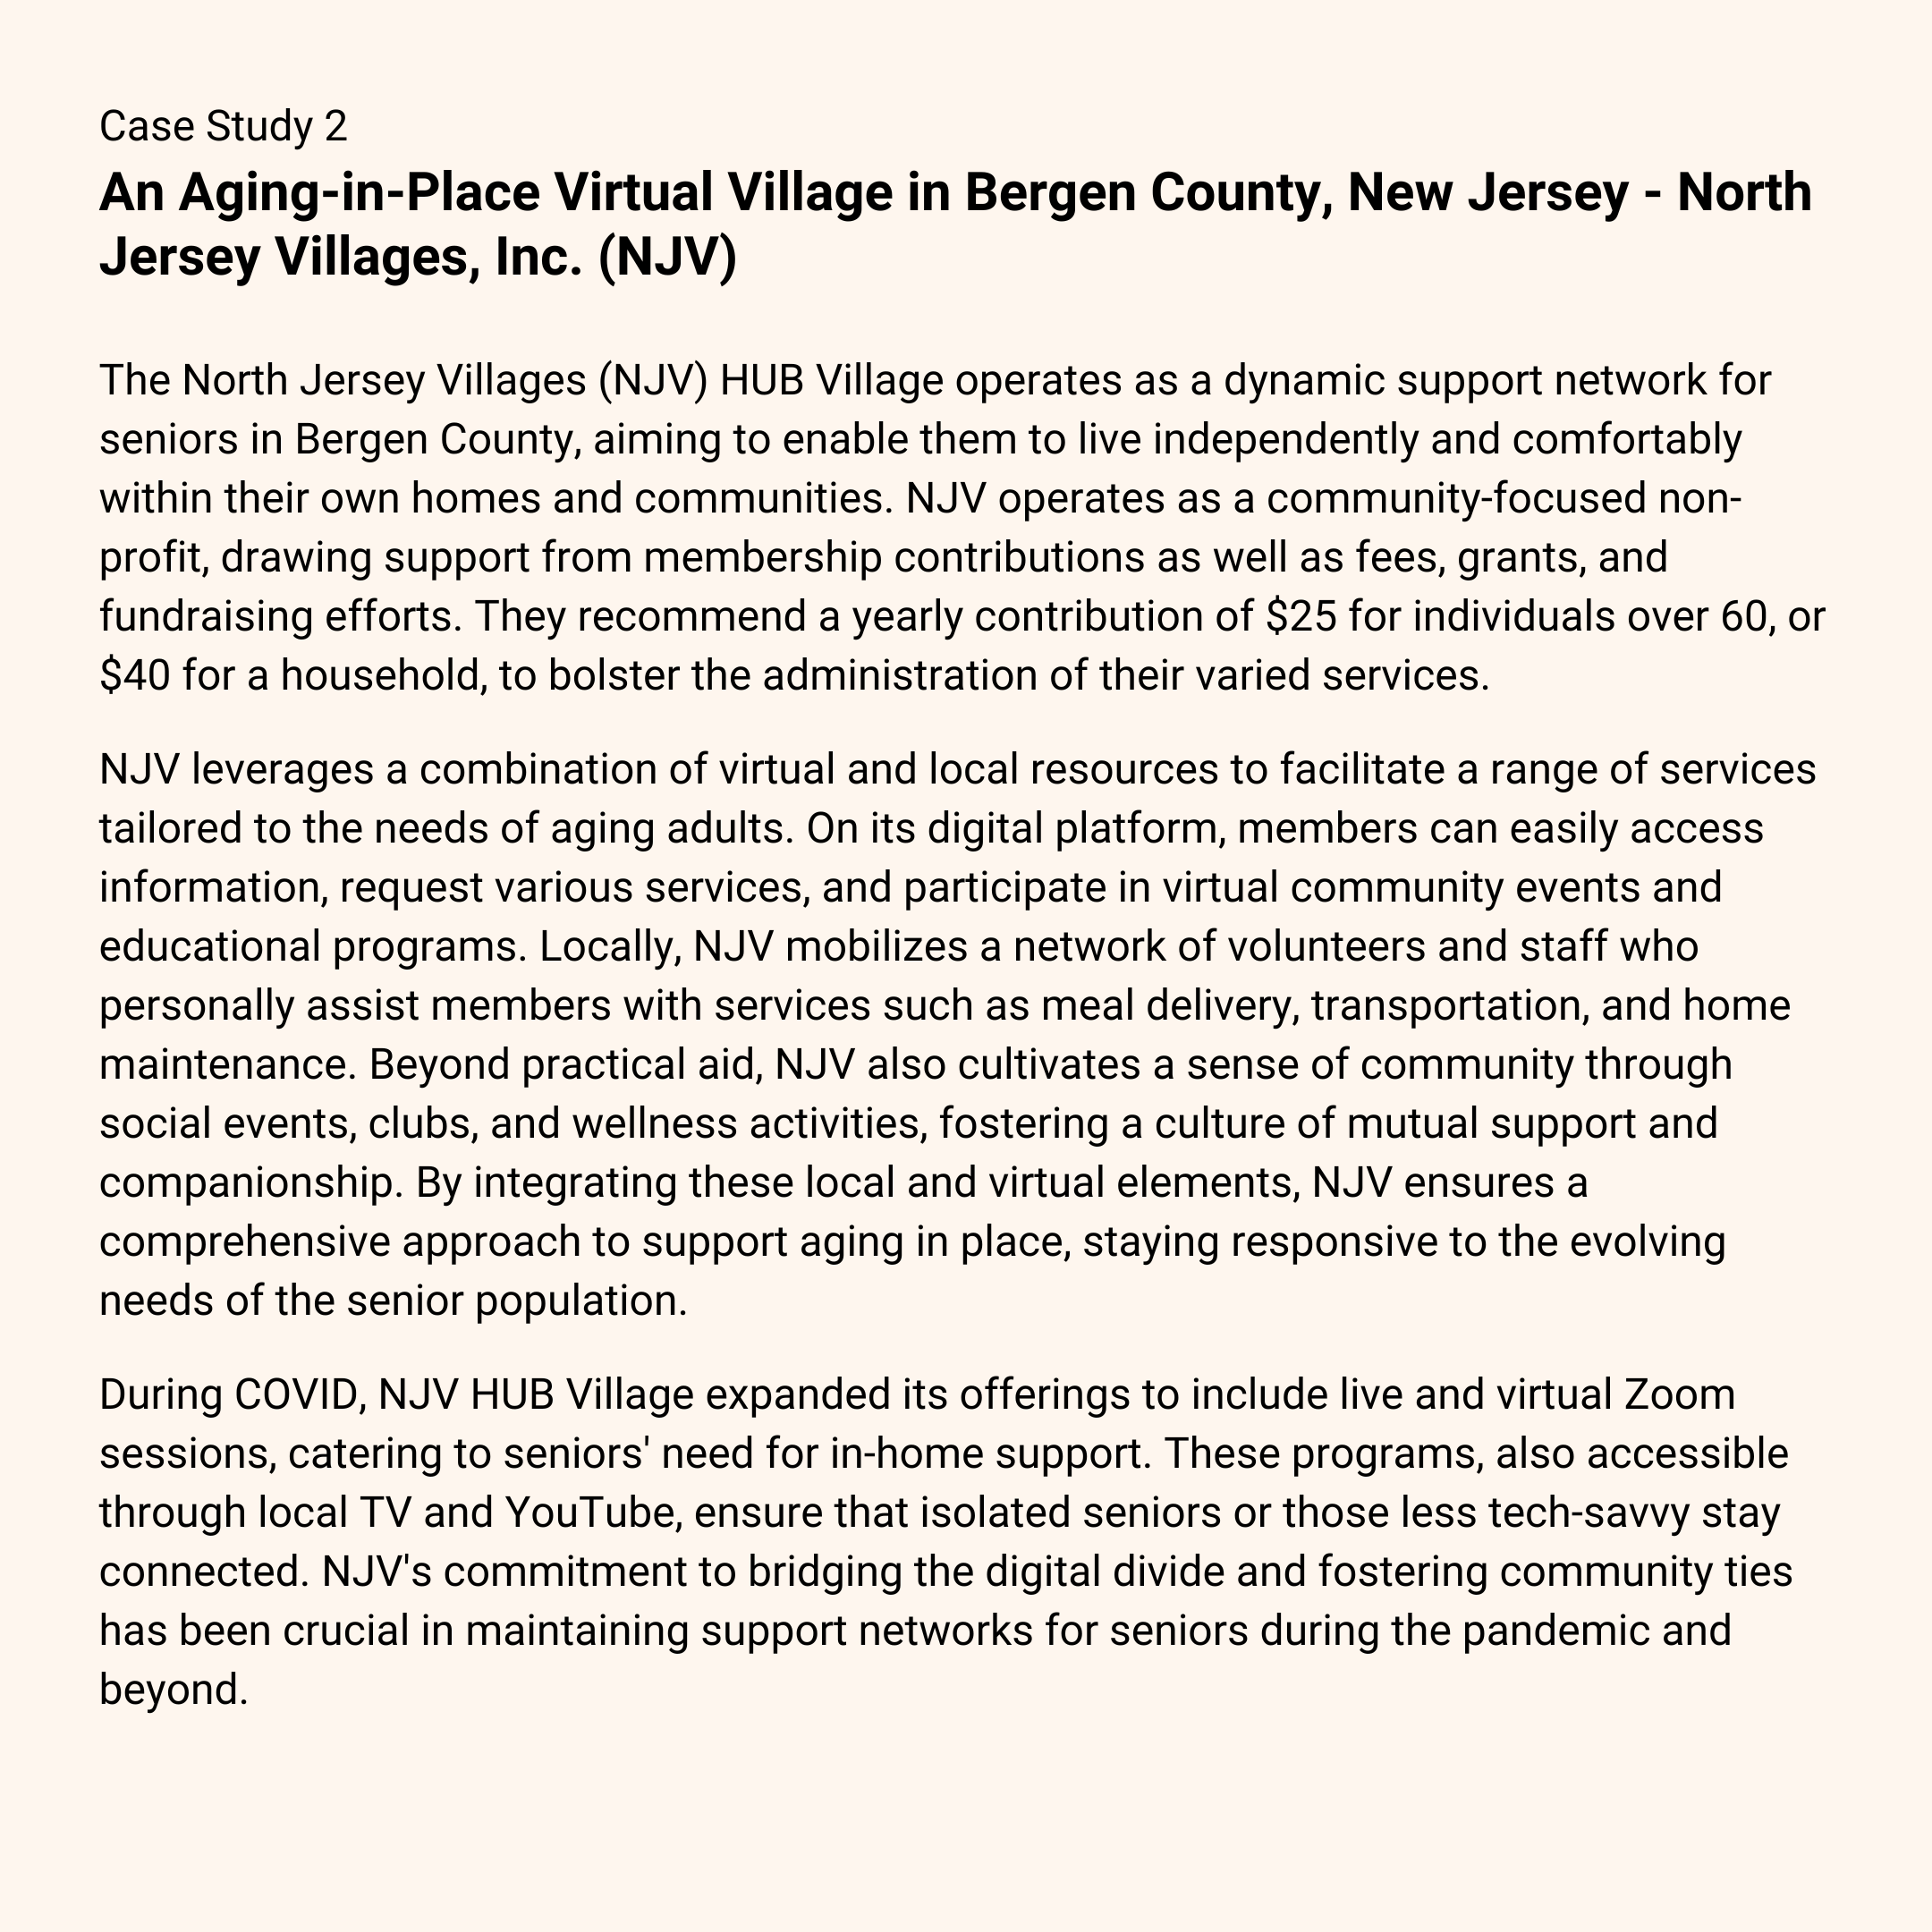 Case Study 2: An Aging-in-Place Virtual Village in Bergen County, New Jersey - North Jersey Villages, Inc. (NJV)